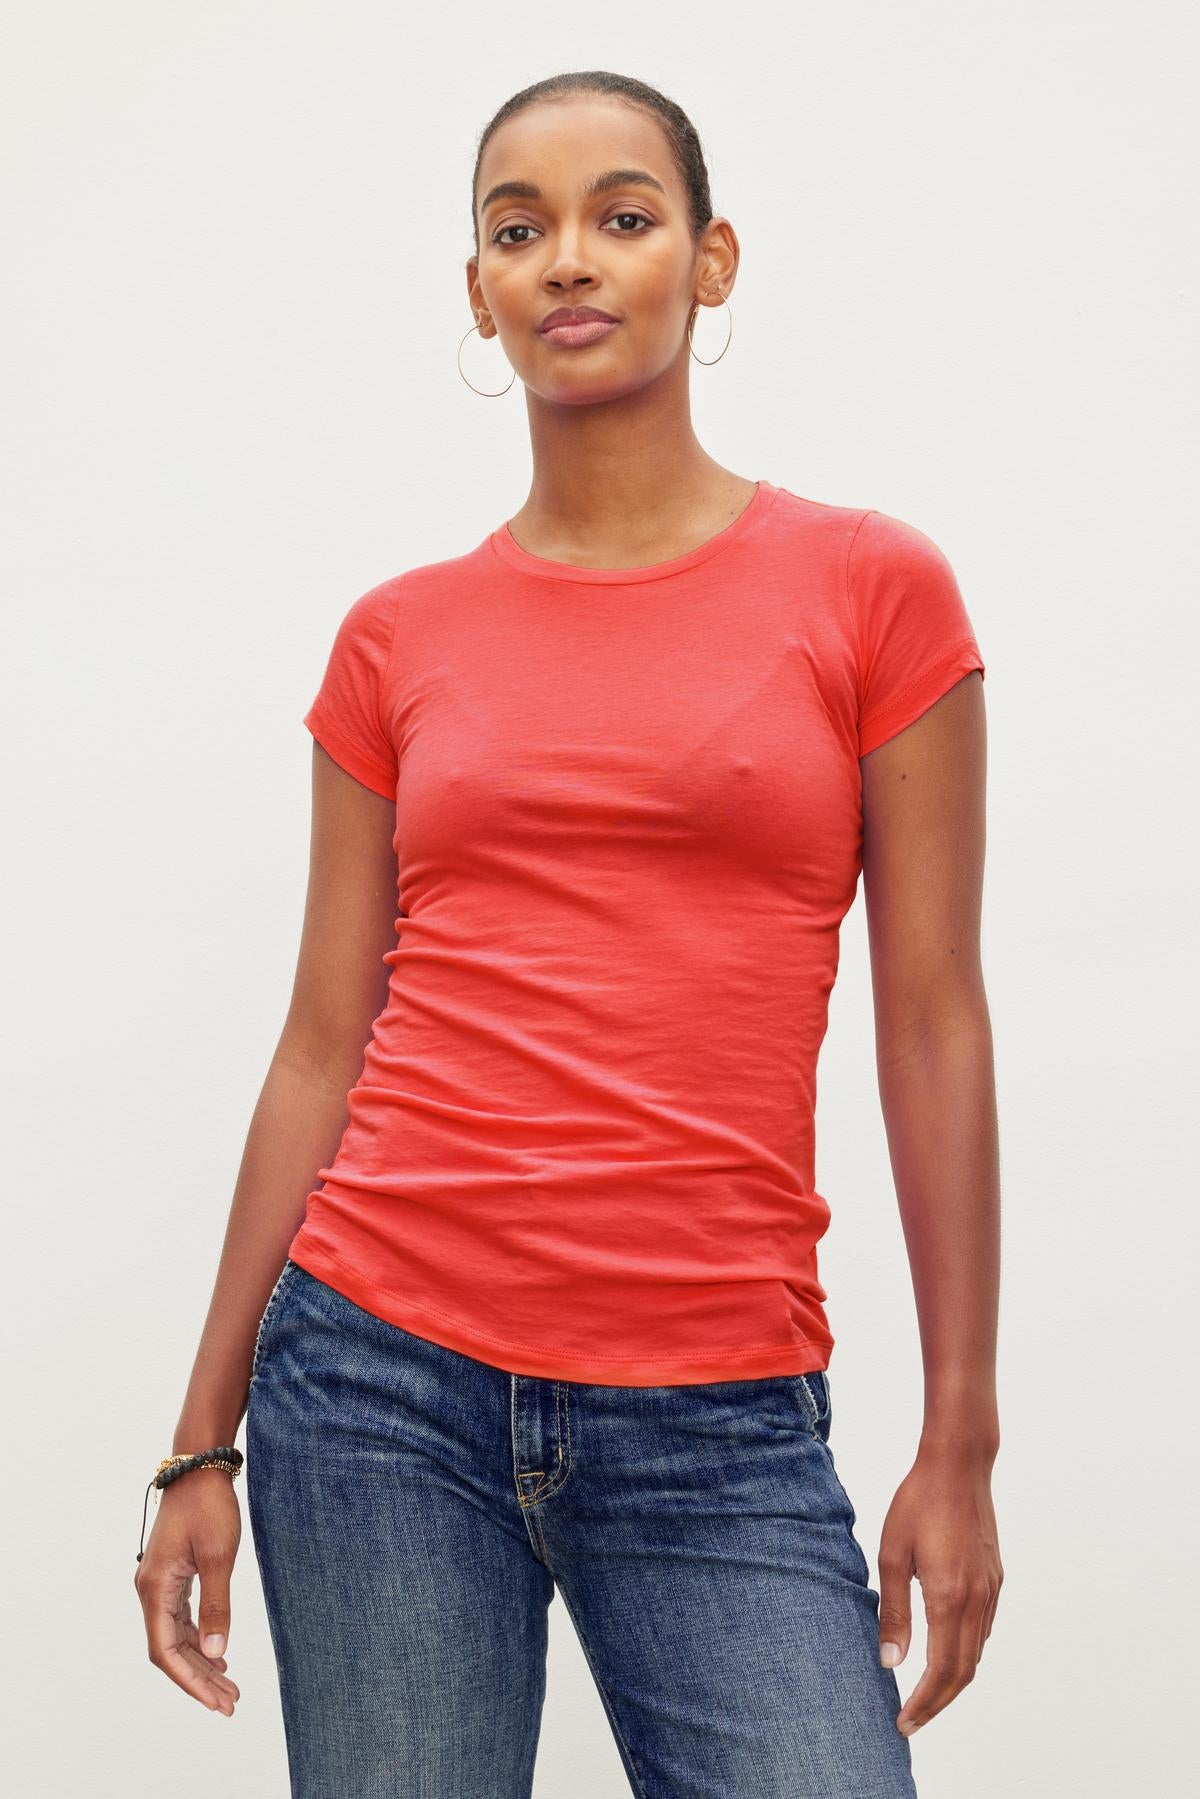 A woman wearing a Velvet by Graham & Spencer JEMMA GAUZY WHISPER FITTED CREW NECK TEE and jeans.-36002770485441